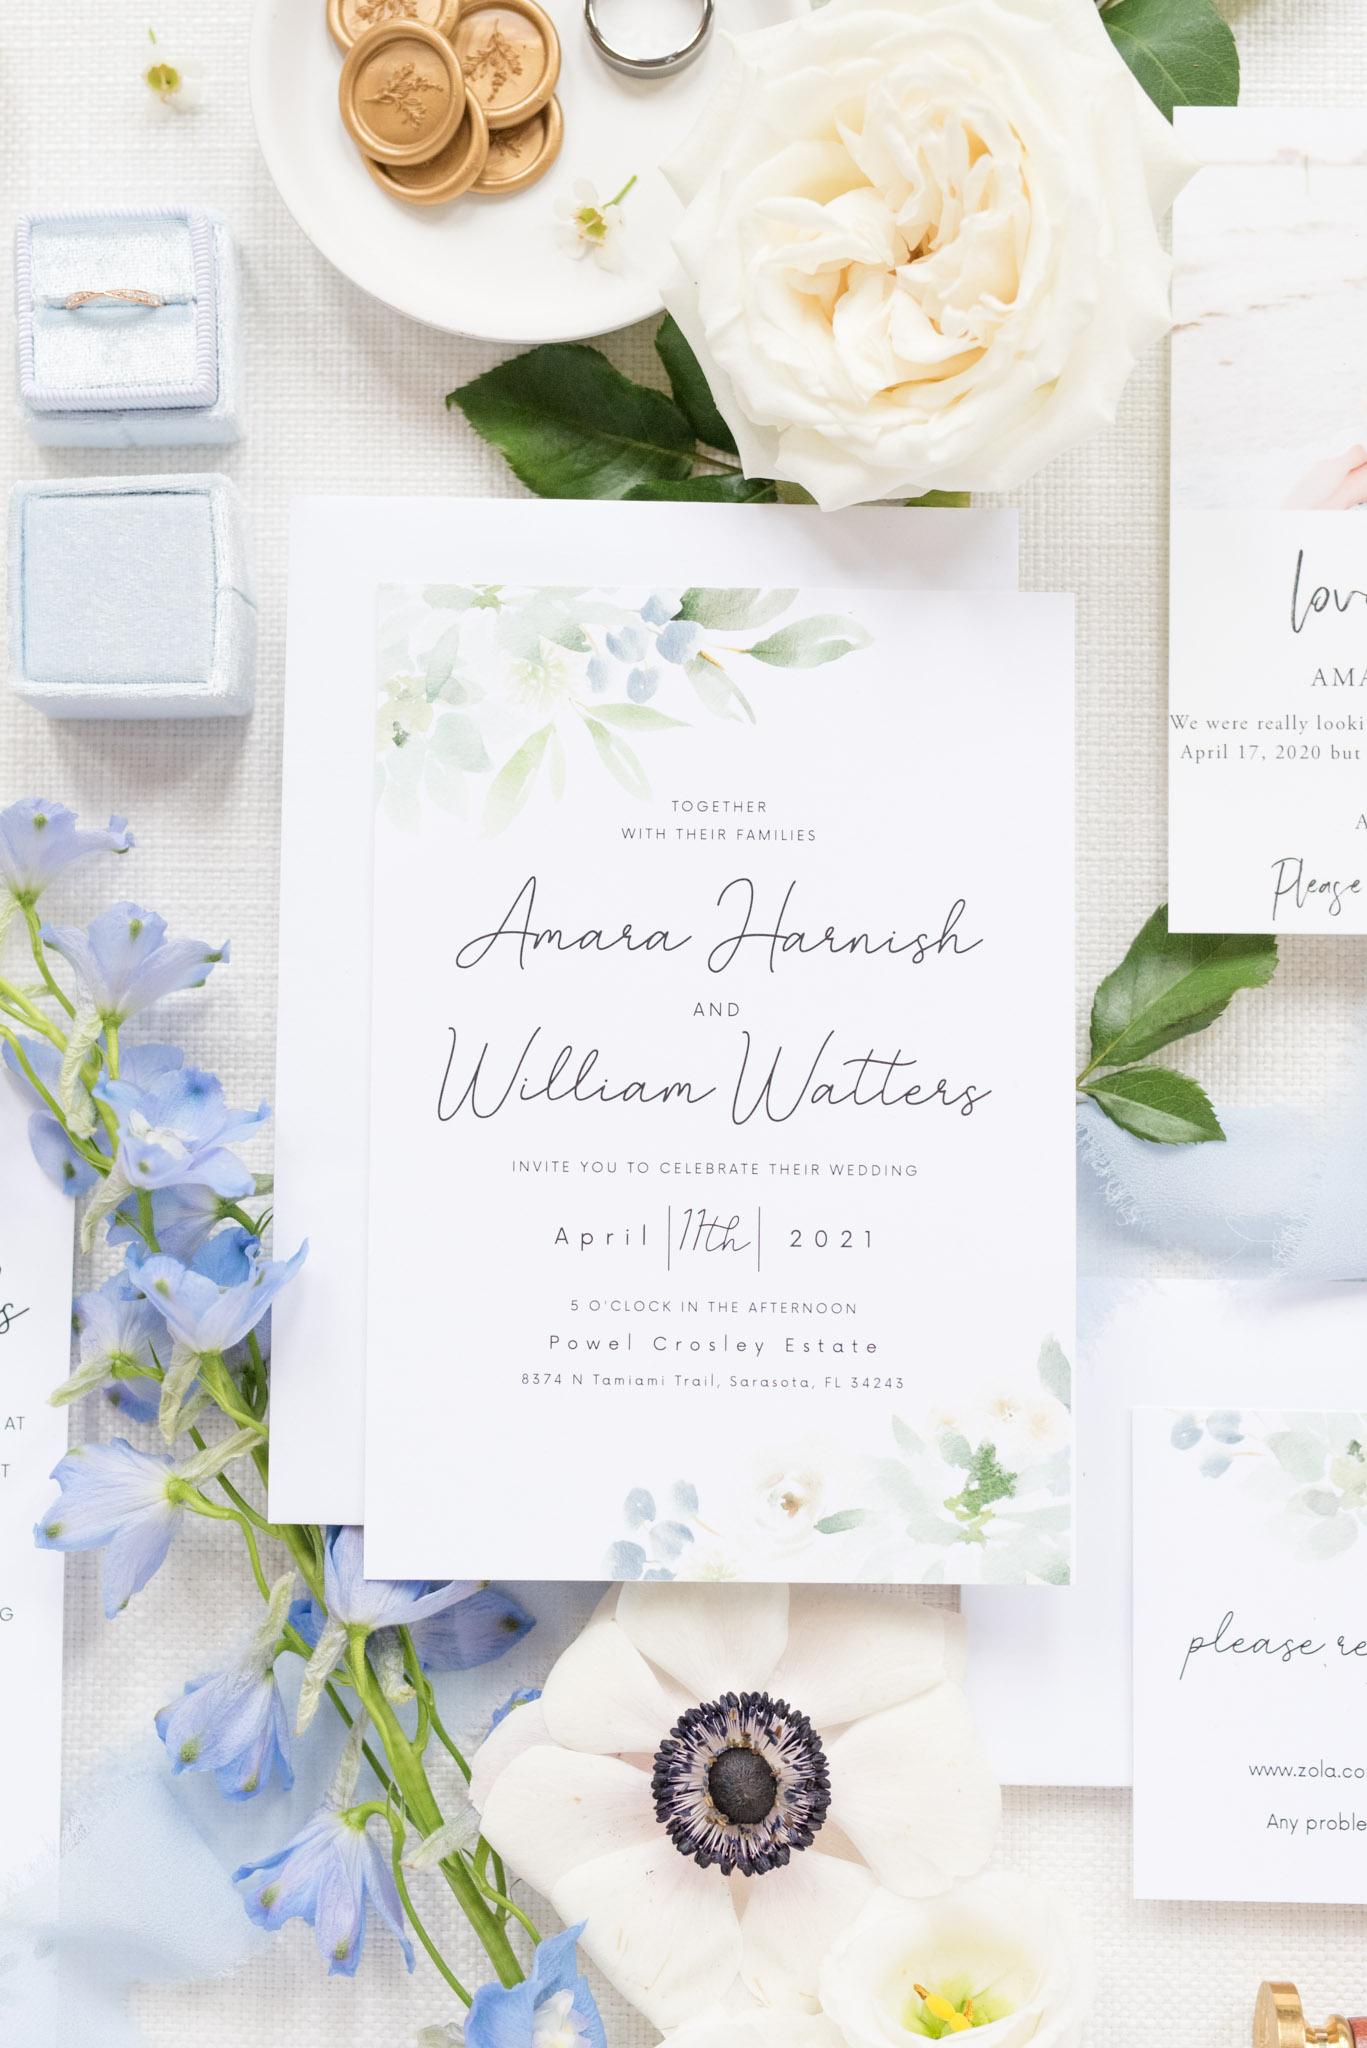 Wedding invitation surrounded by flowers.